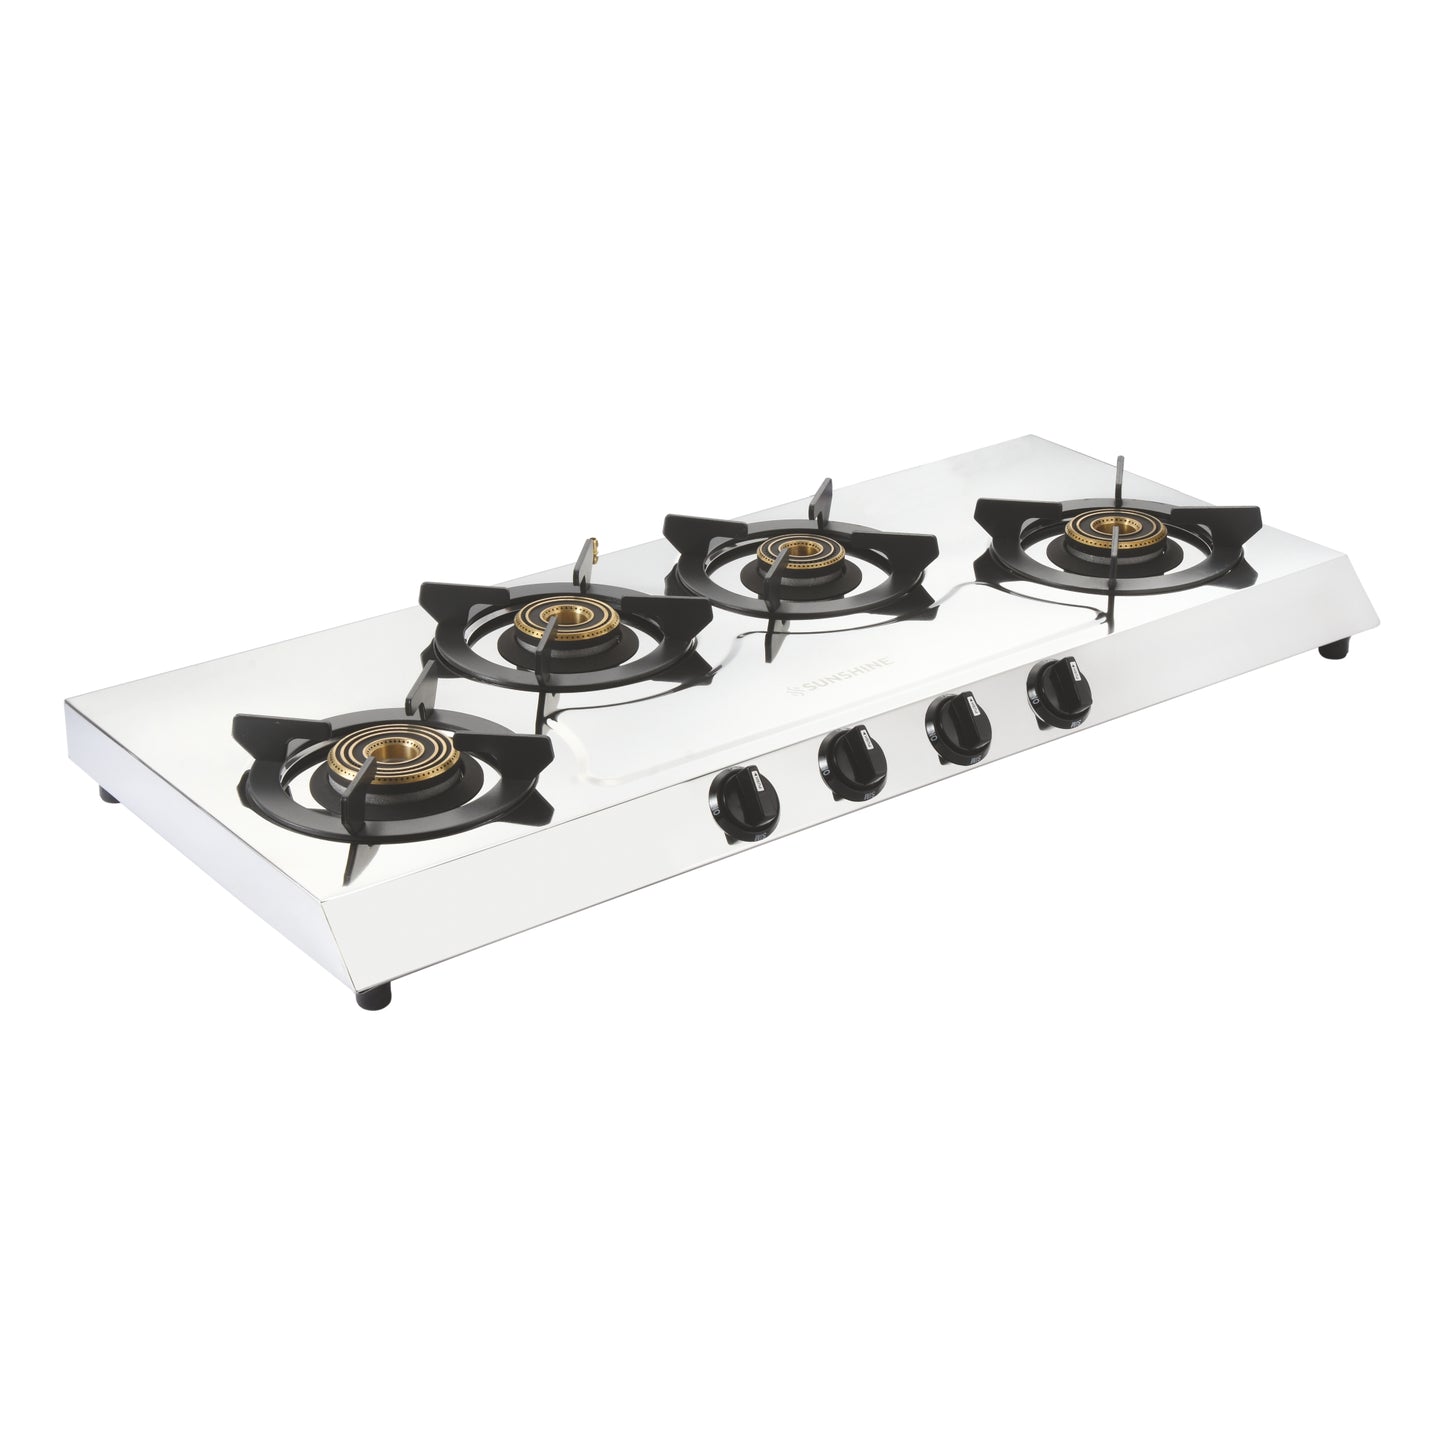 Sunshine Magistic Four Burner Stainless Steel Gas Stove Manual Ignition